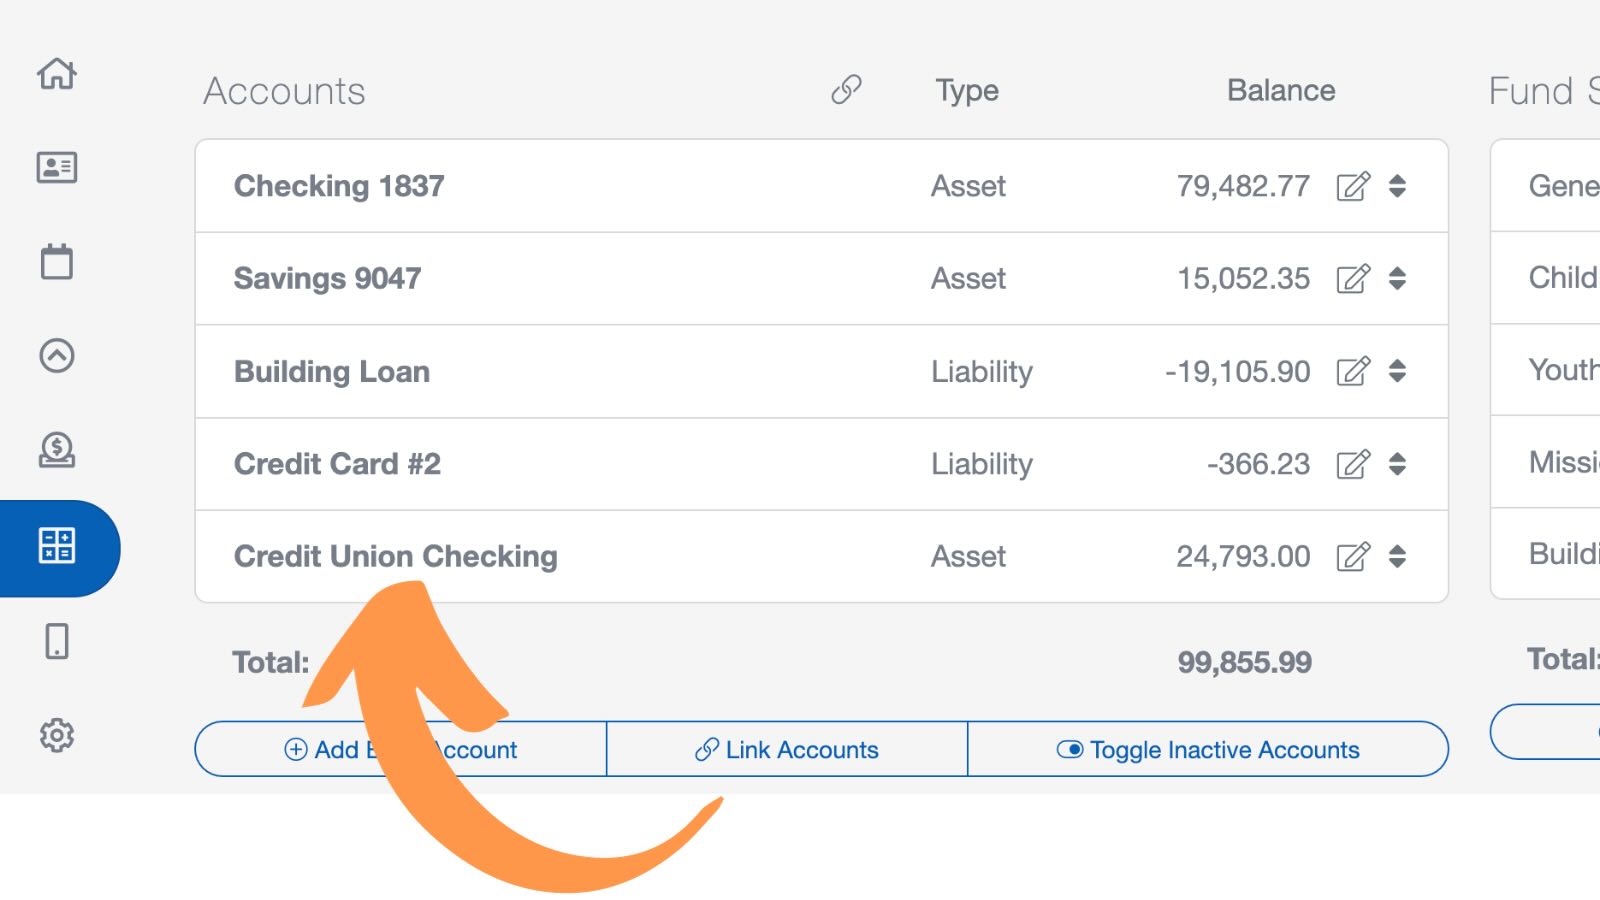 You've entered the church bank account for the church accounting feature in ChurchTrac